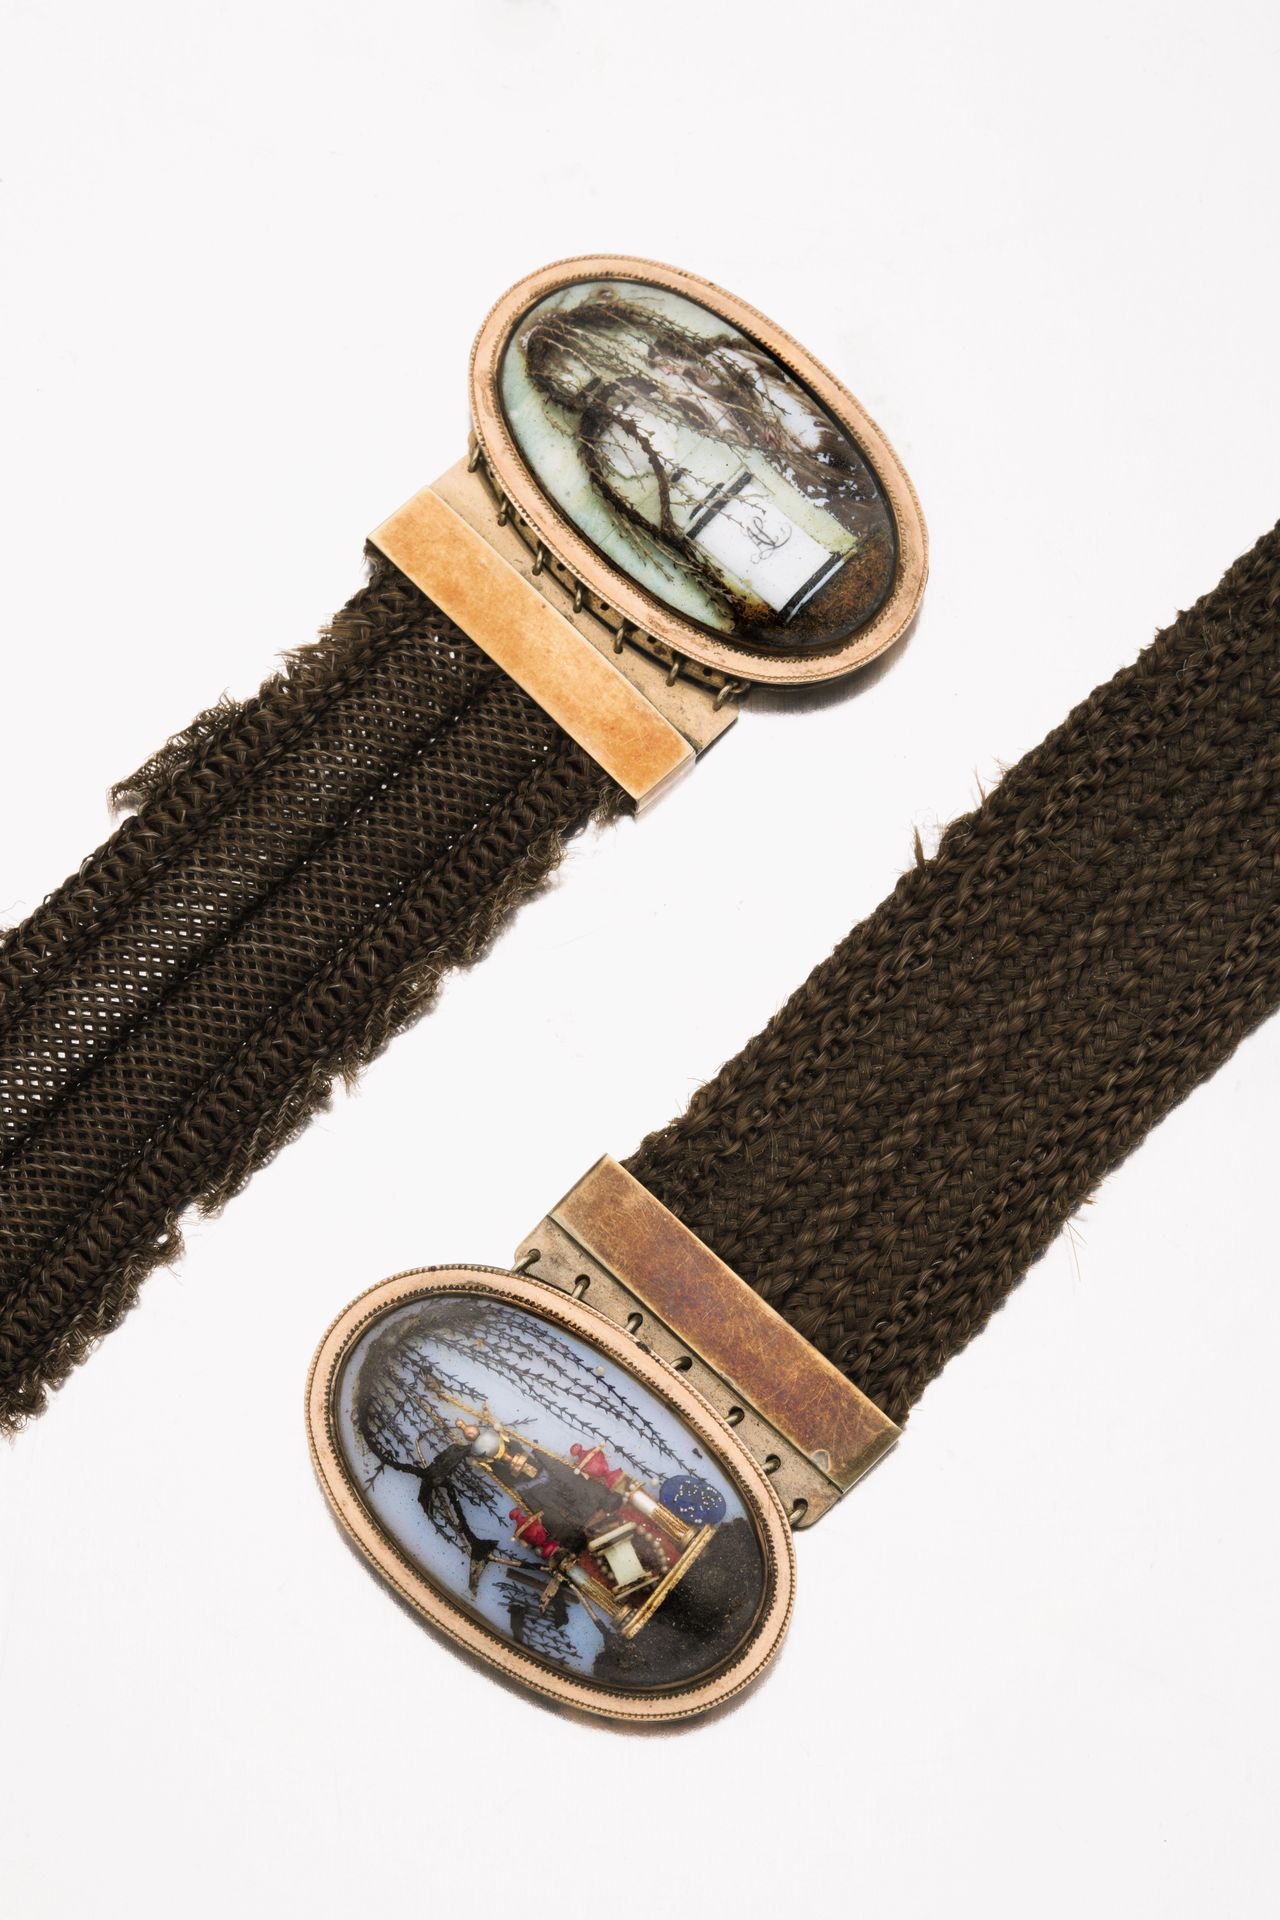 Pair Of American Gold And Hairwork Mourning Bracelets, Dated 1776 and 1792